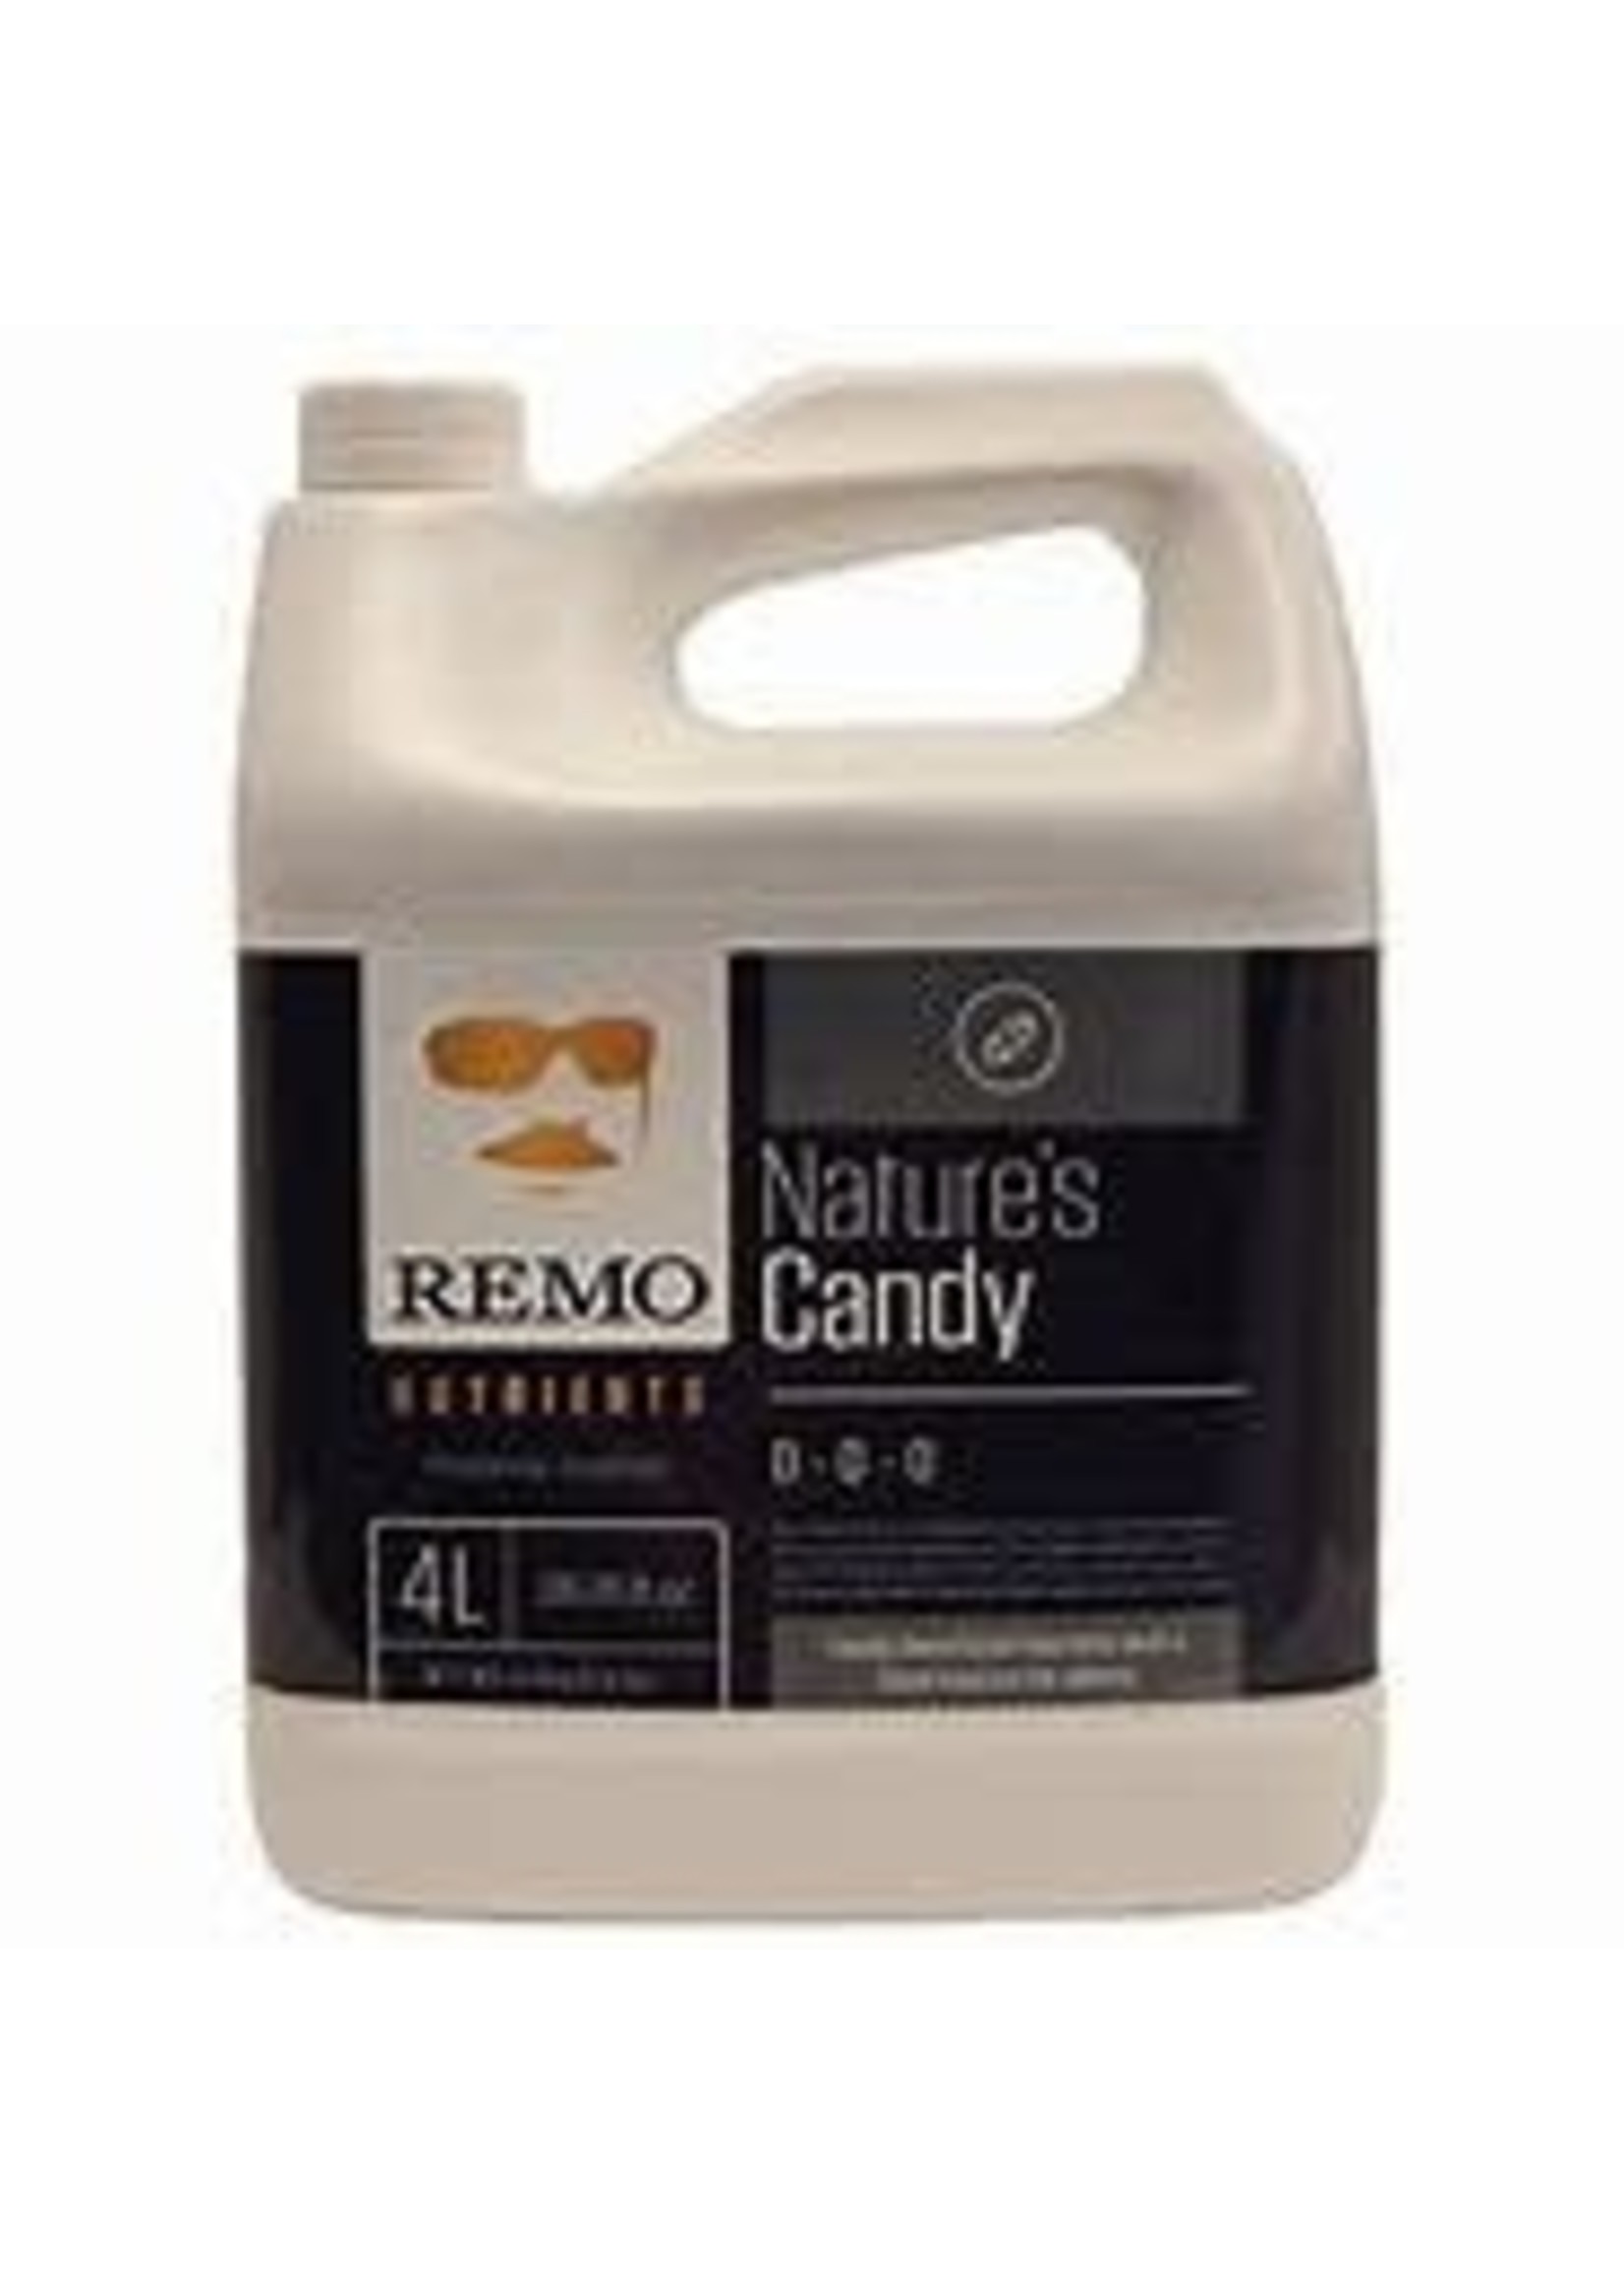 Remo Remos Natures Candy